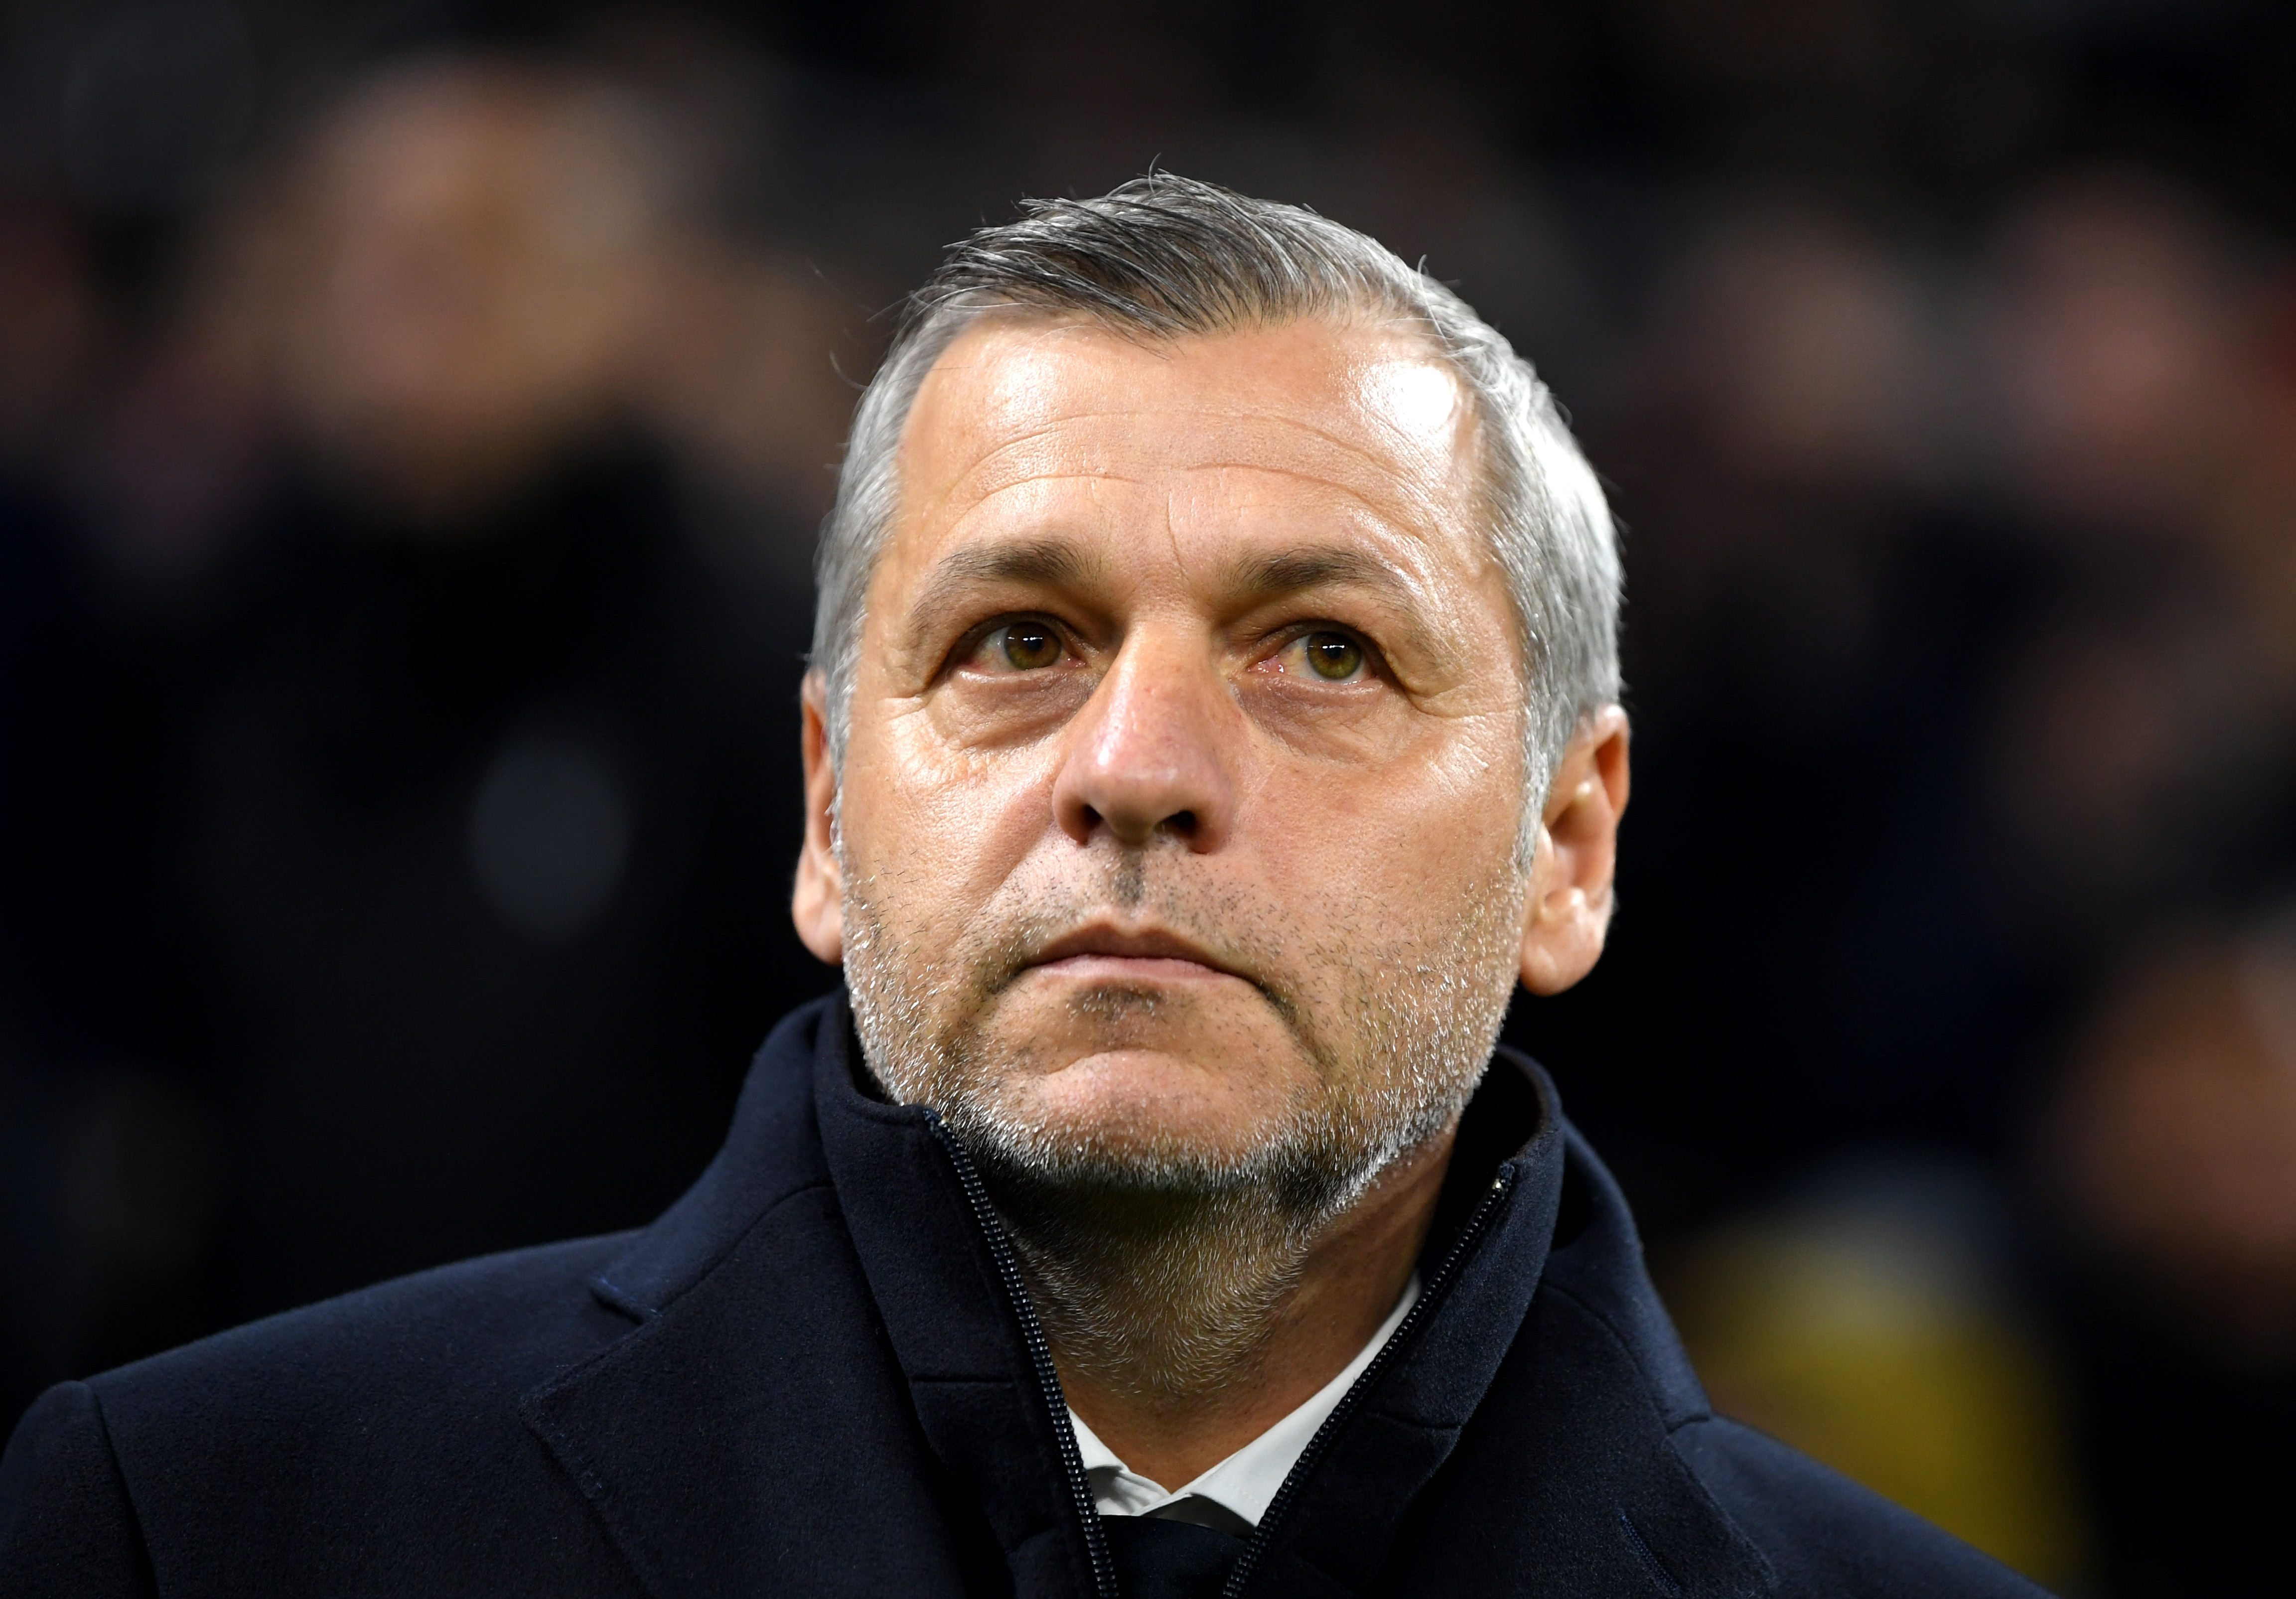 LYON, FRANCE - NOVEMBER 27:  Bruno Genesio, Manager of Olympique Lyonnais looks on prior to the UEFA Champions League Group F match between Olympique Lyonnais and Manchester City at Groupama Stadium on November 27, 2018 in Lyon, France.  (Photo by Shaun Botterill/Getty Images)